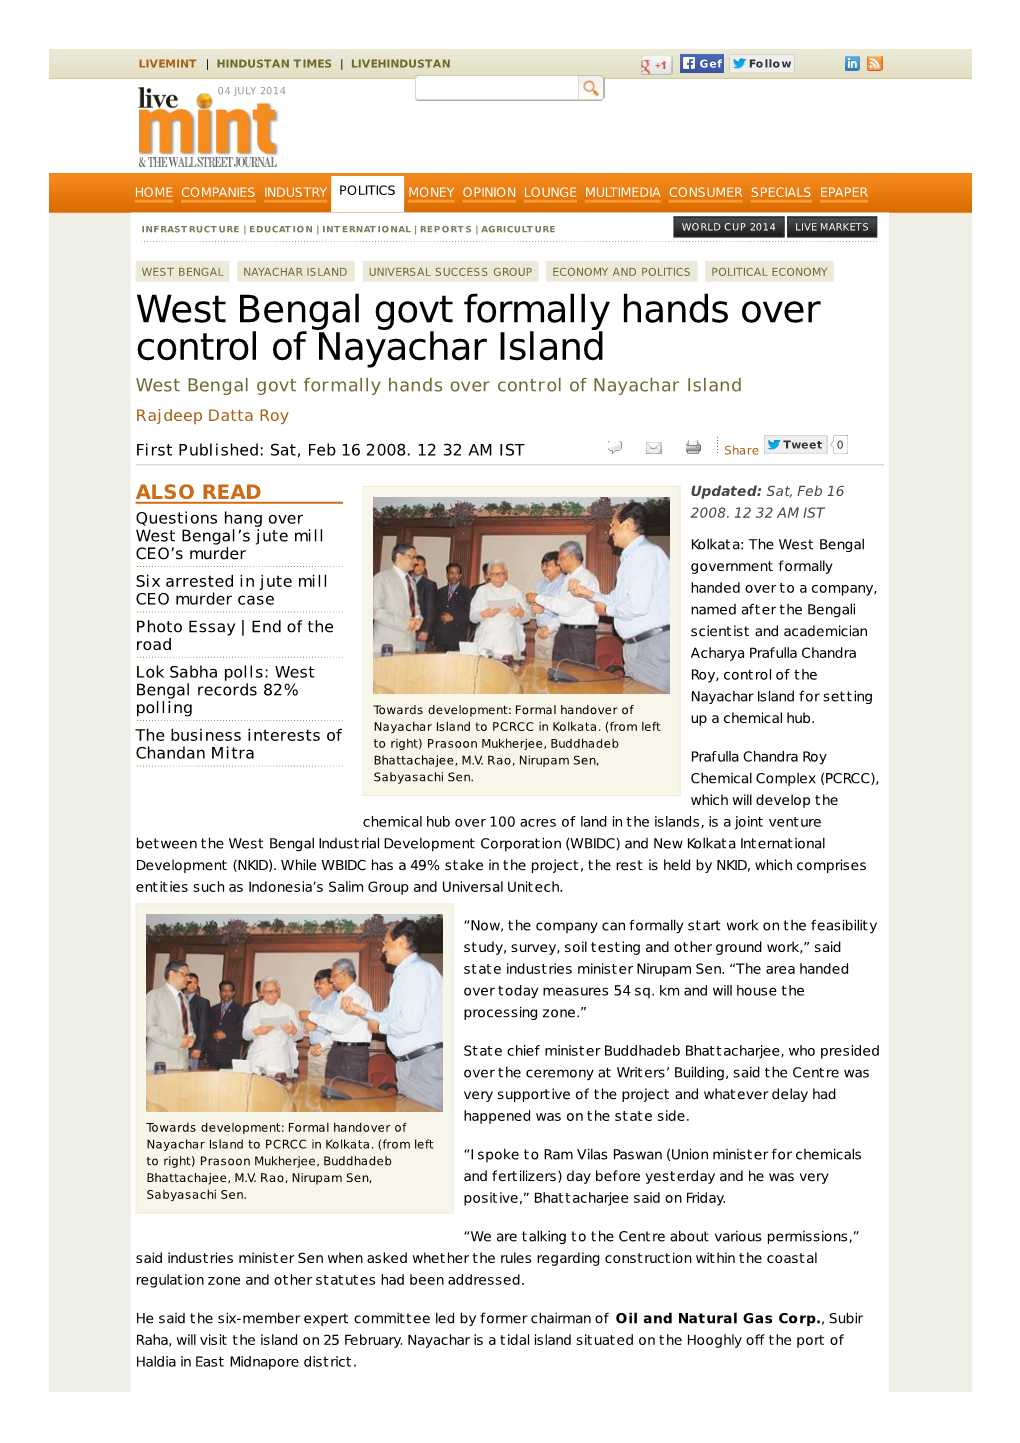 West Bengal Govt Formally Hands Over Control of Nayachar Island West Bengal Govt Formally Hands Over Control of Nayachar Island Rajdeep Datta Roy